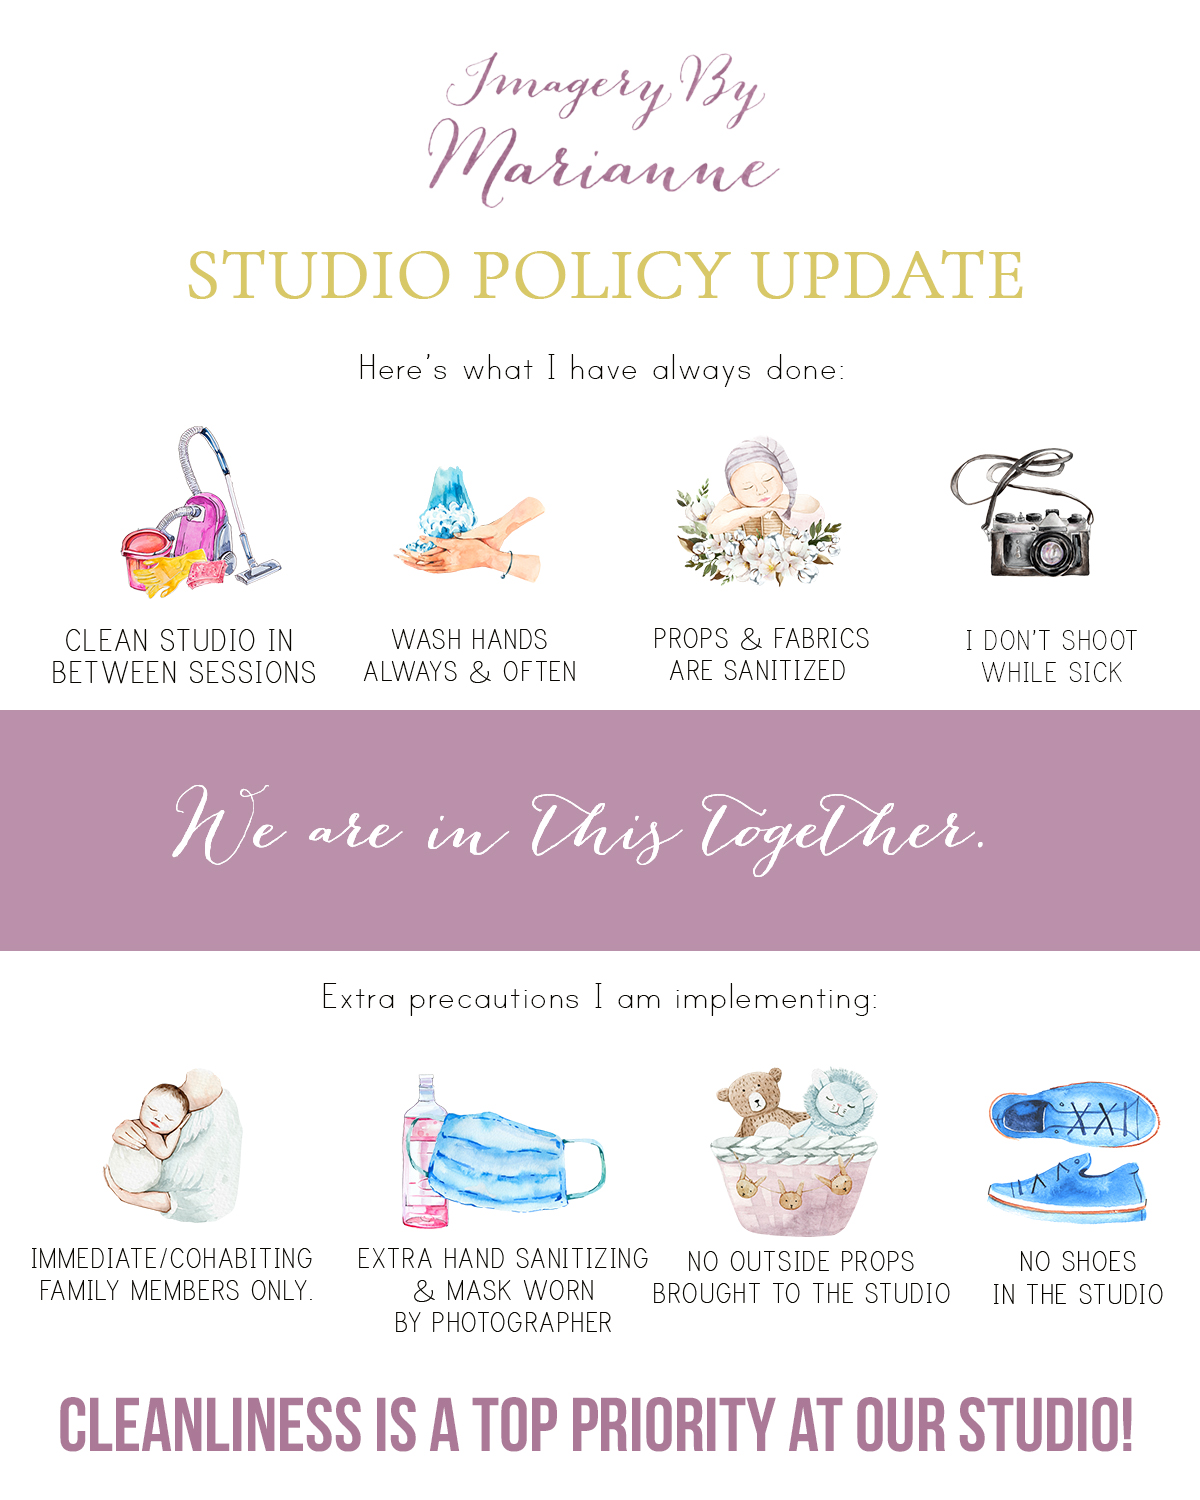 imagery by marianne studio policy update